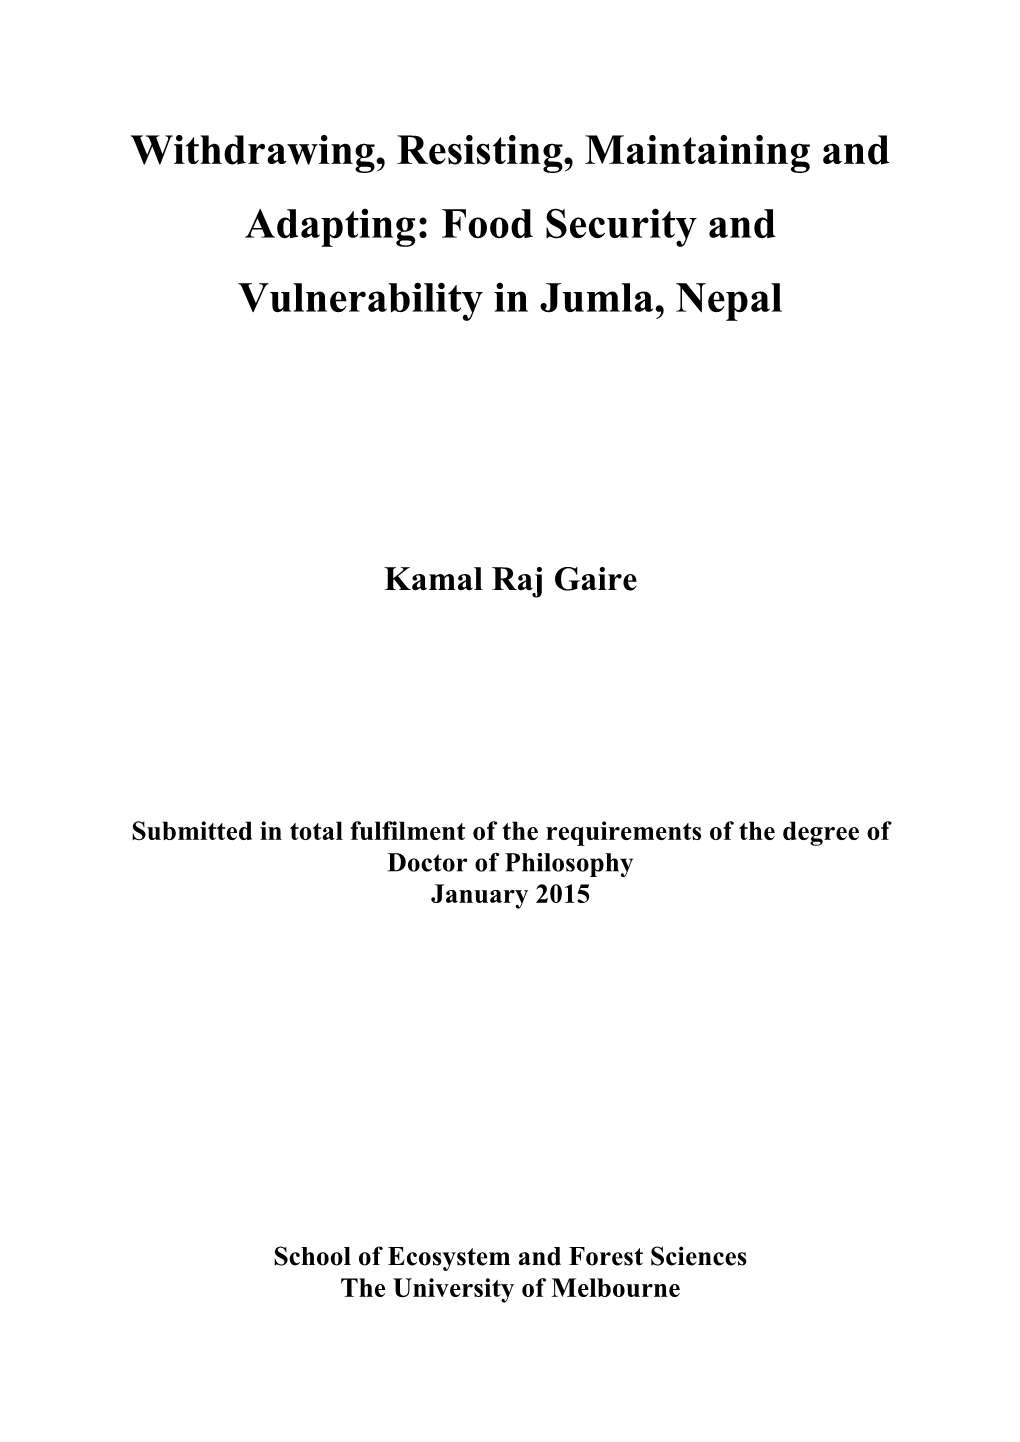 Food Security and Vulnerability in Jumla, Nepal